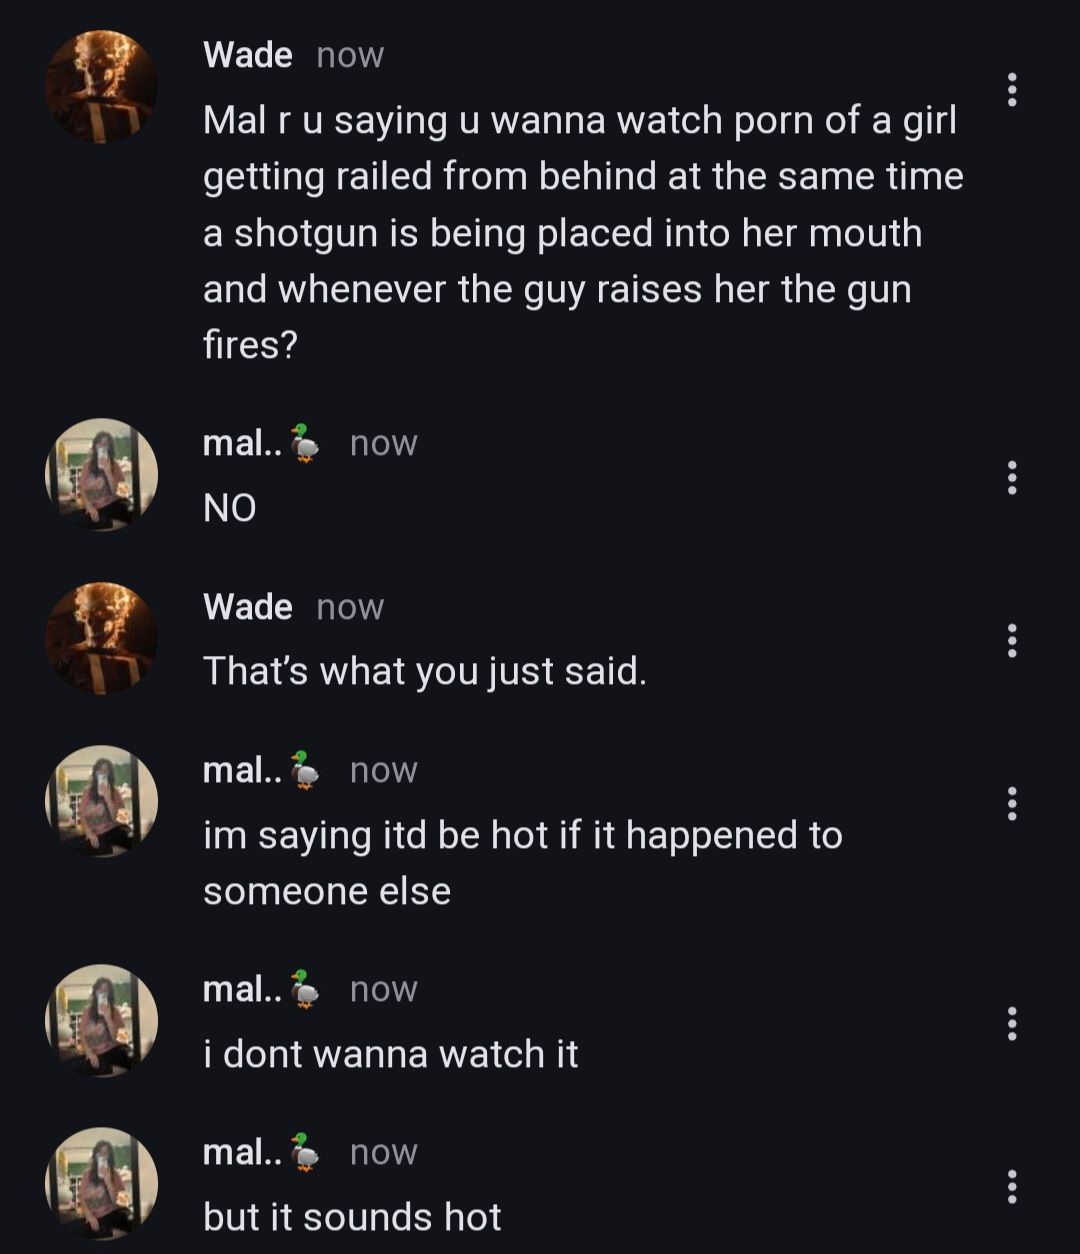 Wade now
Mal r u saying u wanna watch porn of a girl
getting railed from behind at the same time
a shotgun is being placed into her mouth
and whenever the guy raises her the gun
fires?
mal.. now
NO
Wade now
That's what you just said.
mal..
now
im saying itd be hot if it happened to
someone else
mal..
now
i dont wanna watch it
mal.. now
but it sounds hot